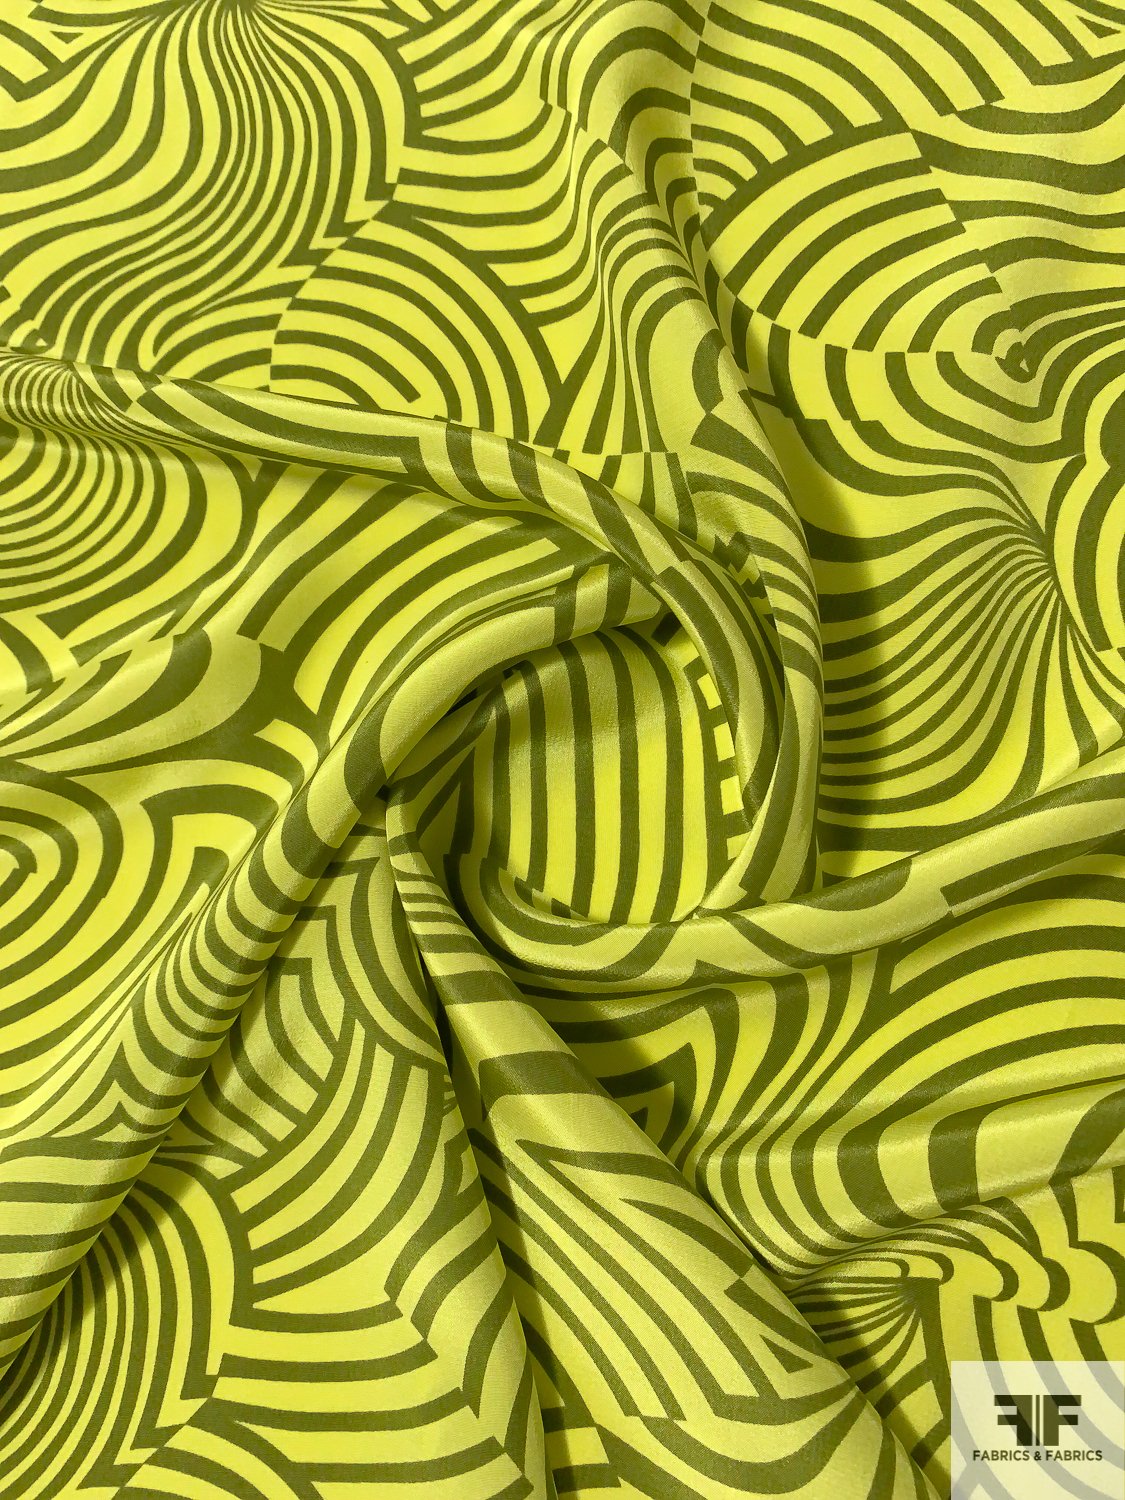 Groovy Hypnotic Printed Silk Crepe de Chine - Electric Lime / Olive Green